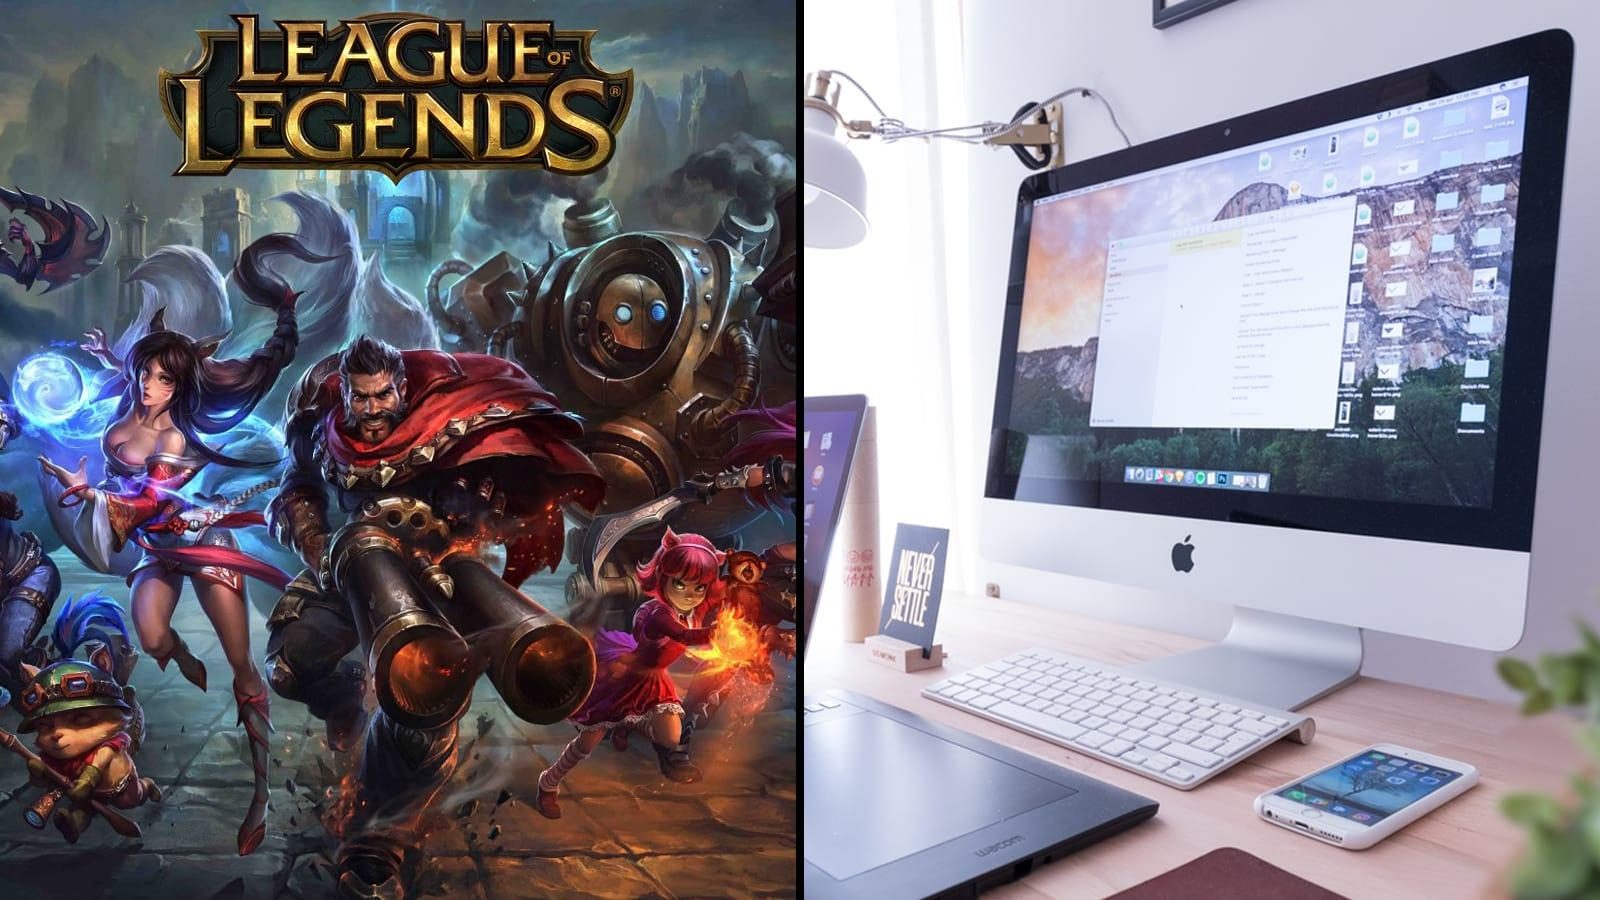 is there a mac client for league of legends